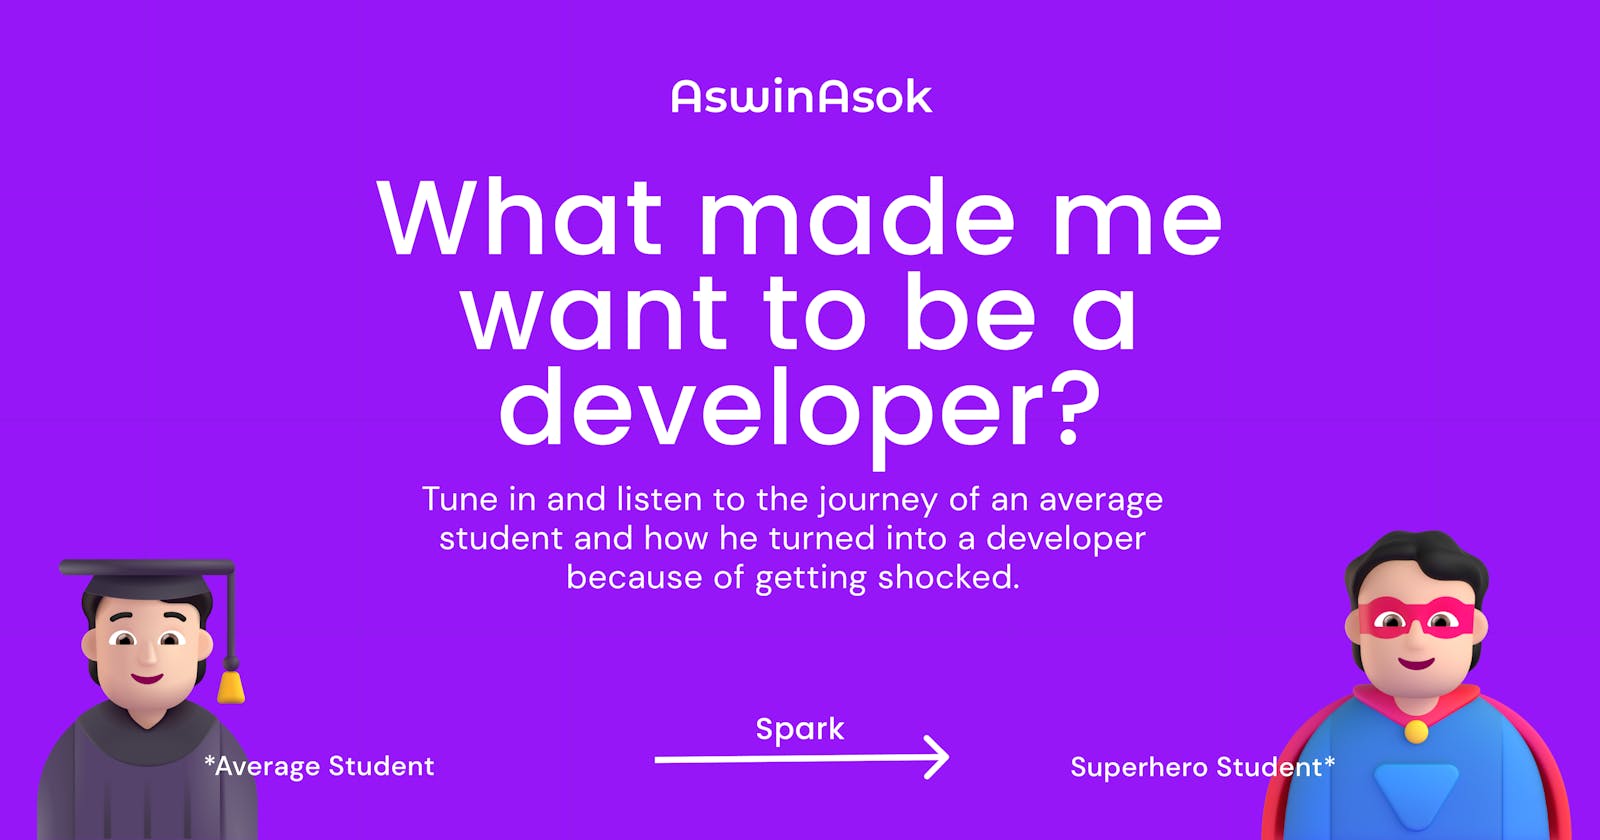 What made me want to be a developer?